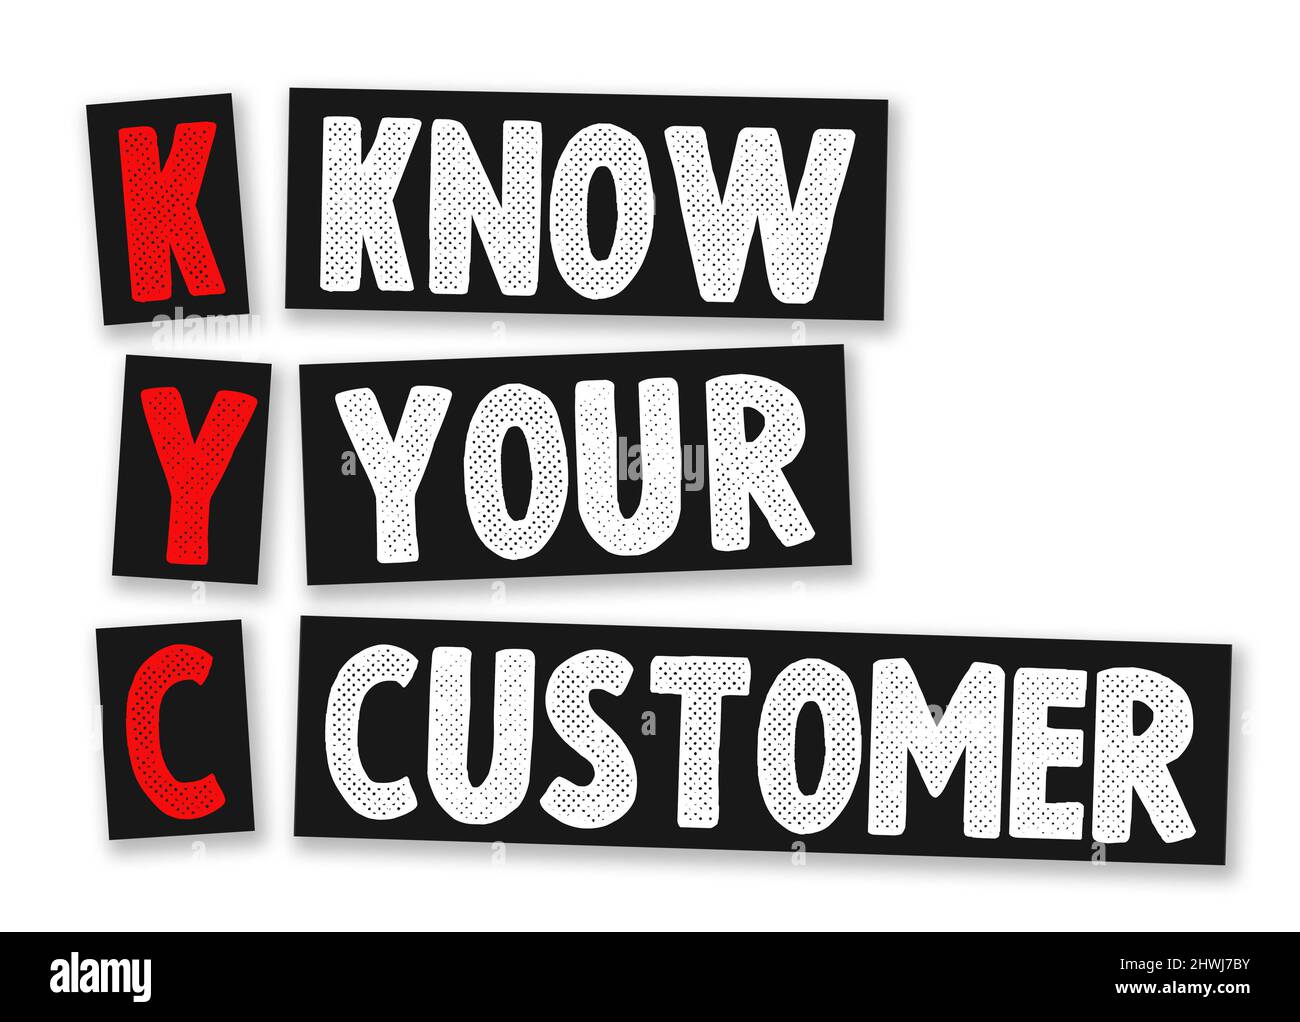 Know your customer - marketing strategy Stock Photo